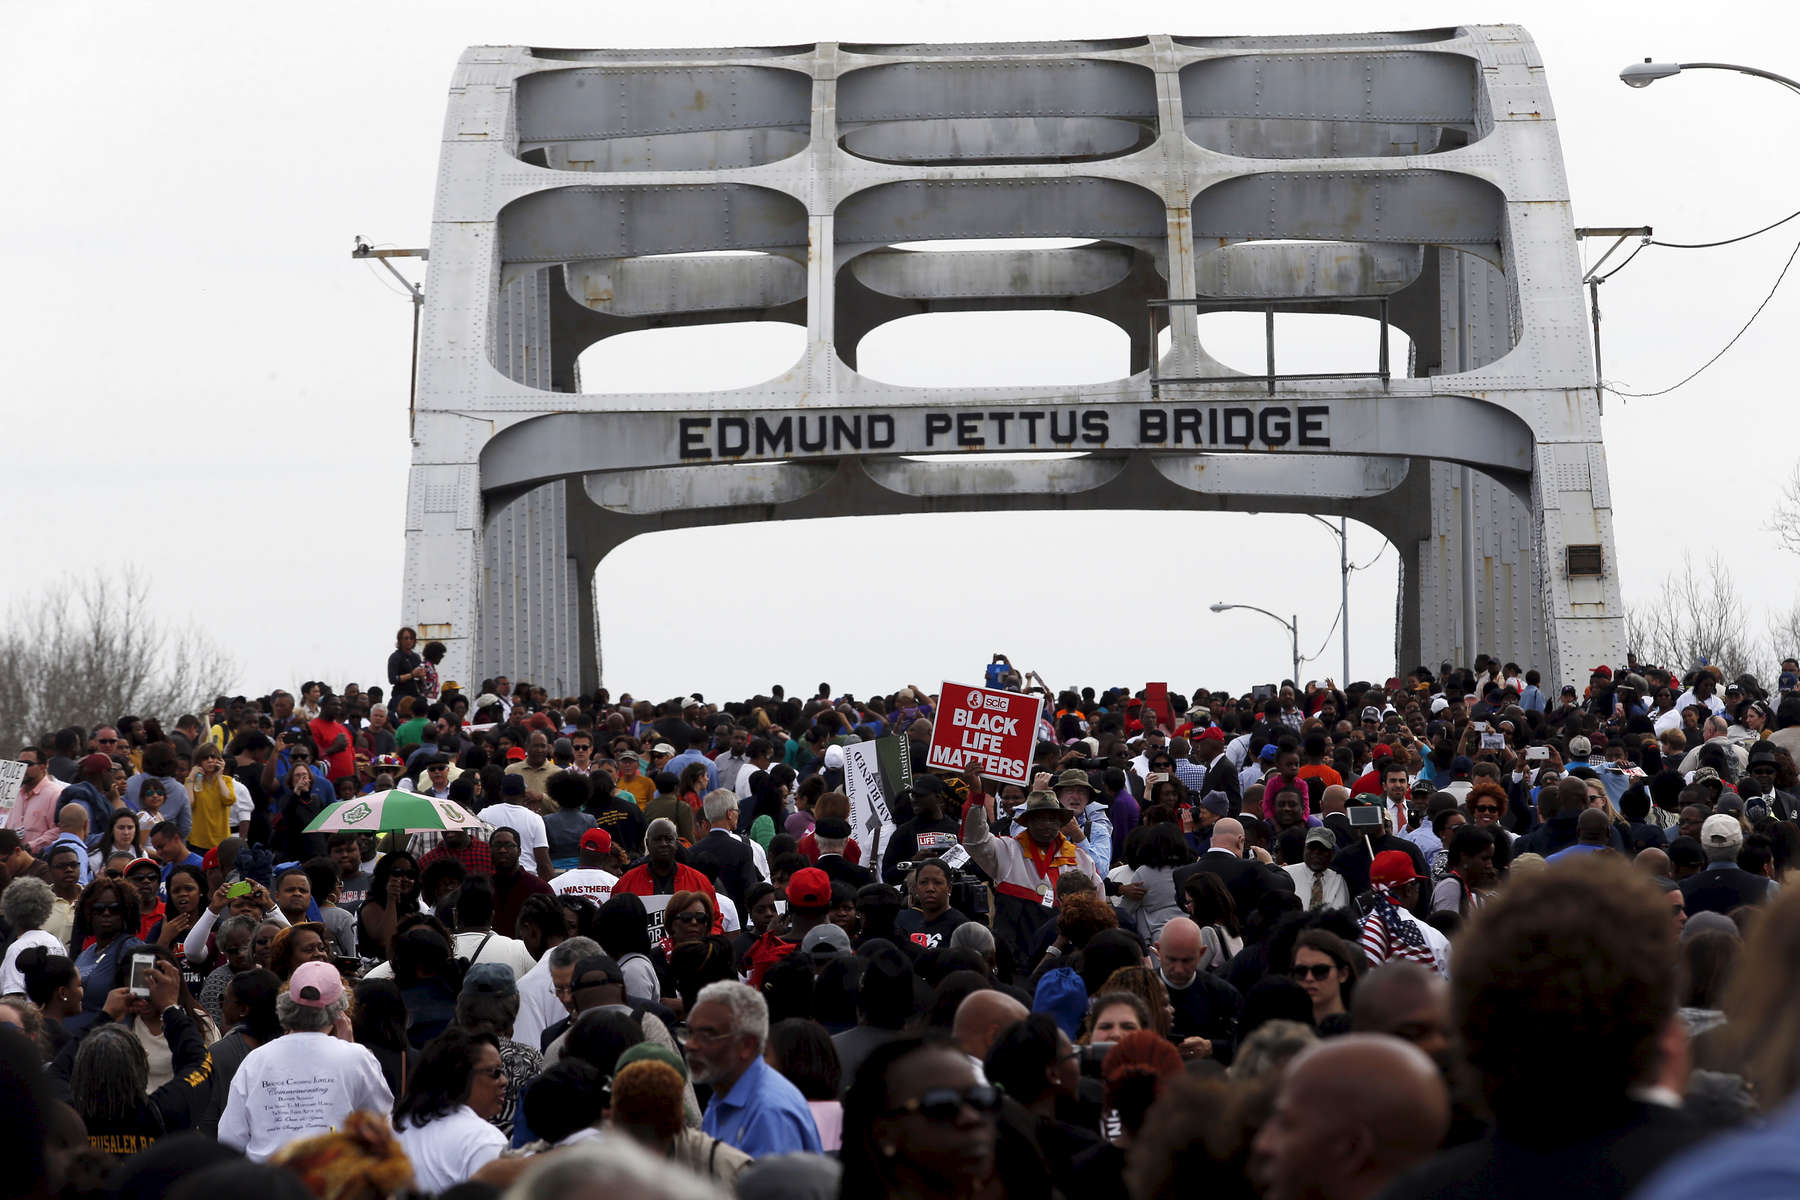 Selma, Alabama -- 3/08/2015-- Marchers retrace the steps of those who marched with Dr. Martin Luther King, Jr. 50 years ago over the Edmund Pettus Bridge in Selma, Alabama March 8, 2015. 